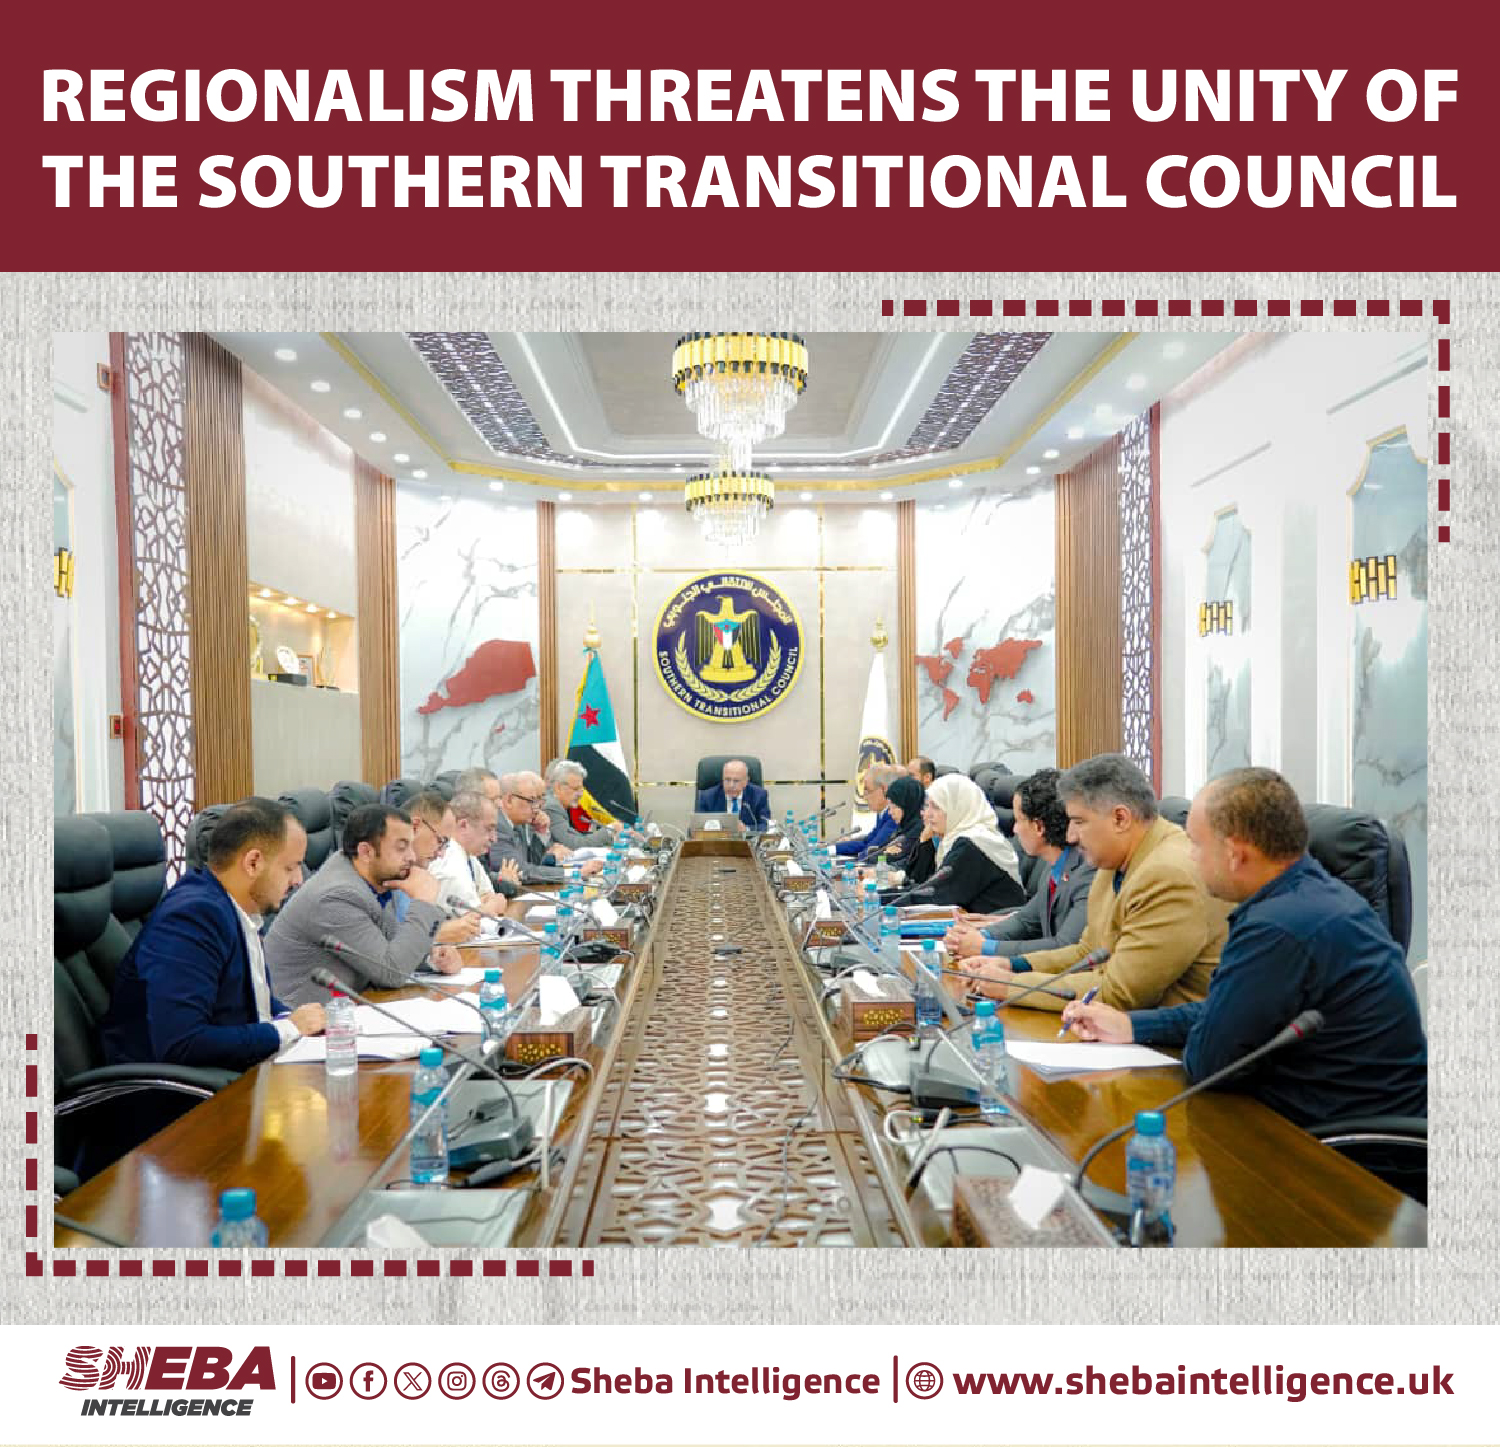 Regionalism Threatens the Unity of the Southern Transitional Council